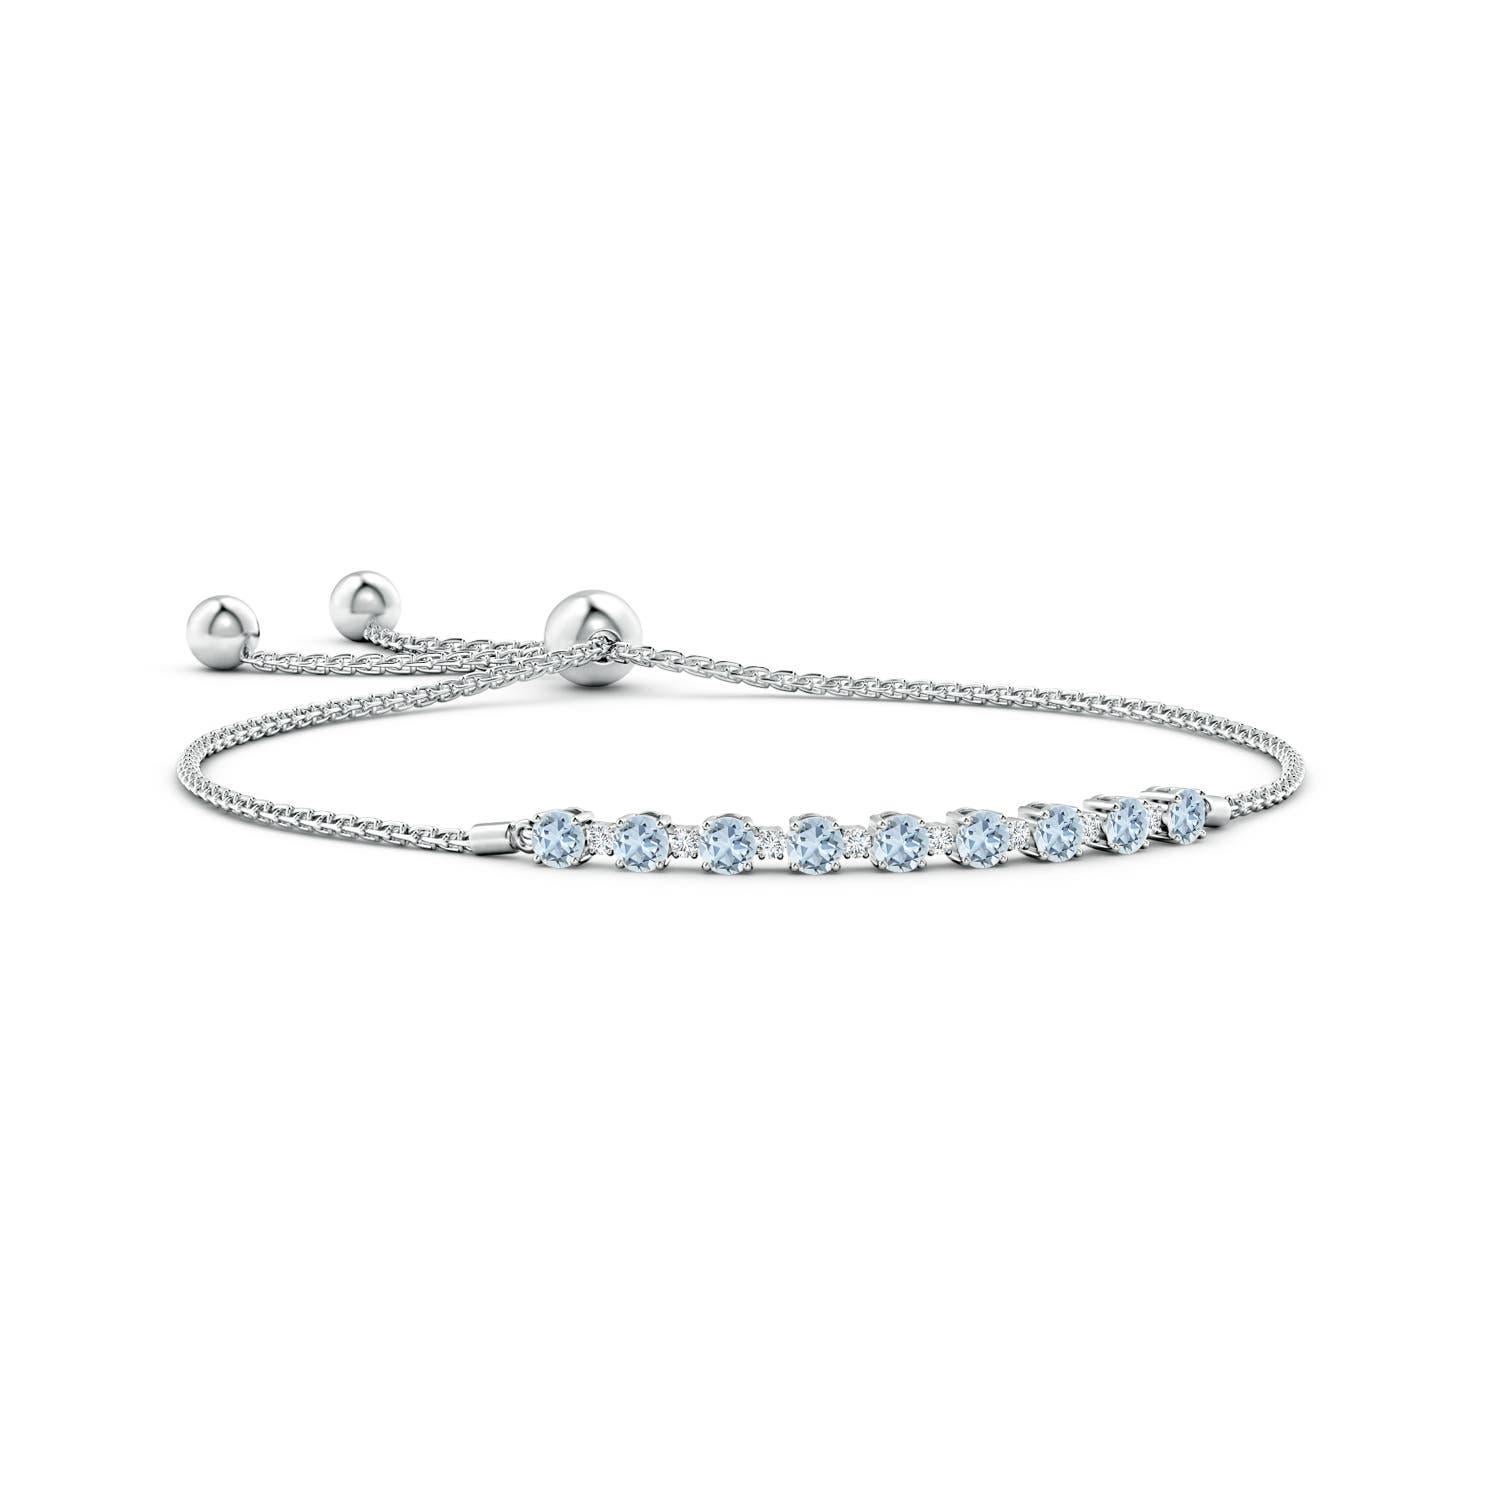 Sea blue aquamarines and glittering diamonds come together on this 14k white gold tennis bolo bracelet. They are prong set alternately and create a classic look. This bracelet is adjustable to fit most wrists.